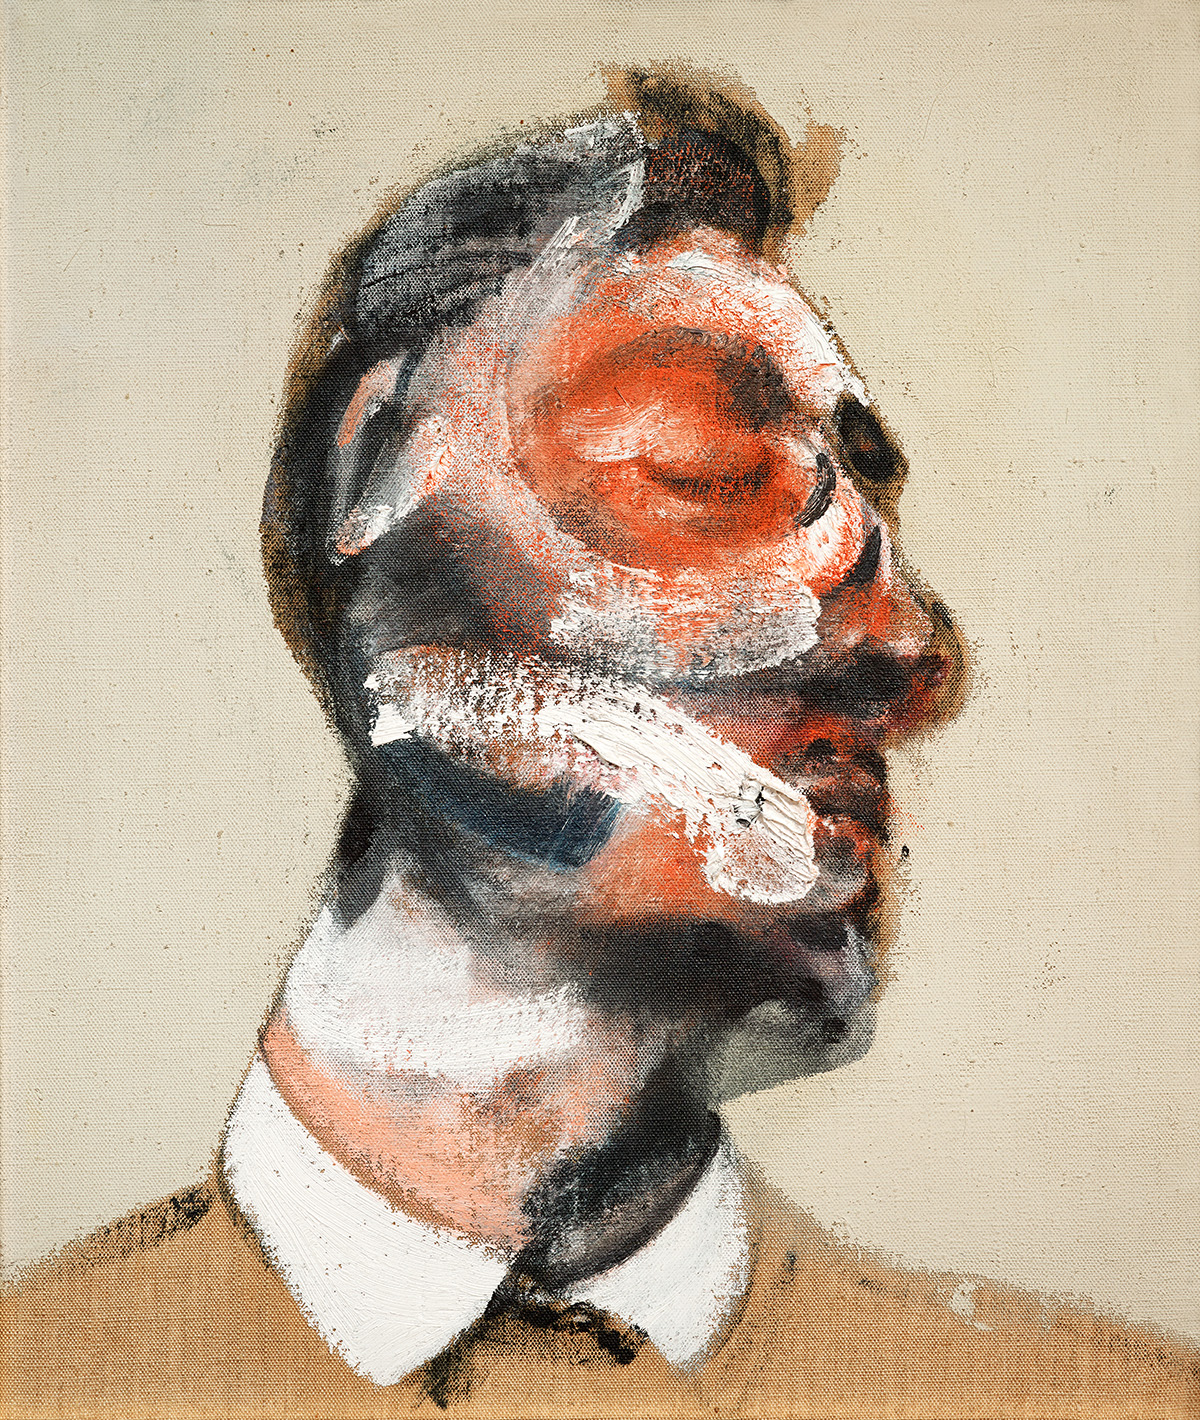 Three Studies for Portrait of George Dyer (on light ground), 1964. Centre Panel. Oil on canvas. CR no. 64-09 Artwork © The Estate of Francis Bacon / DACS London 2022. All rights reserved. 